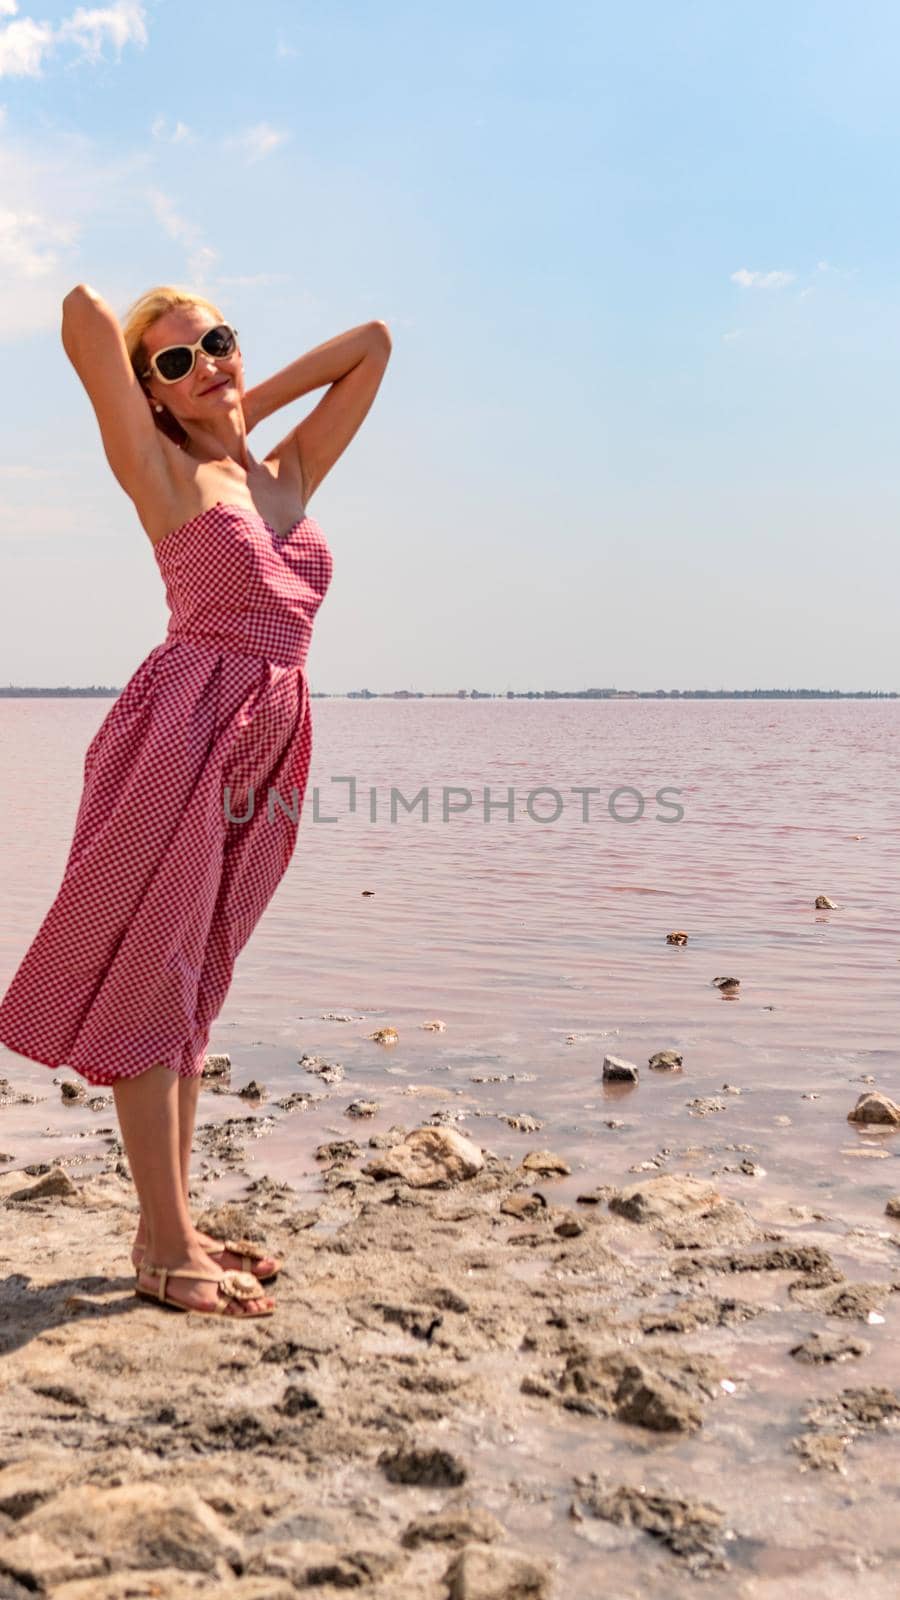 Joyful girl in a beautiful dress, young with a charismatic appearance against the background of a red lake with blue clouds on a summer day by 89167702191